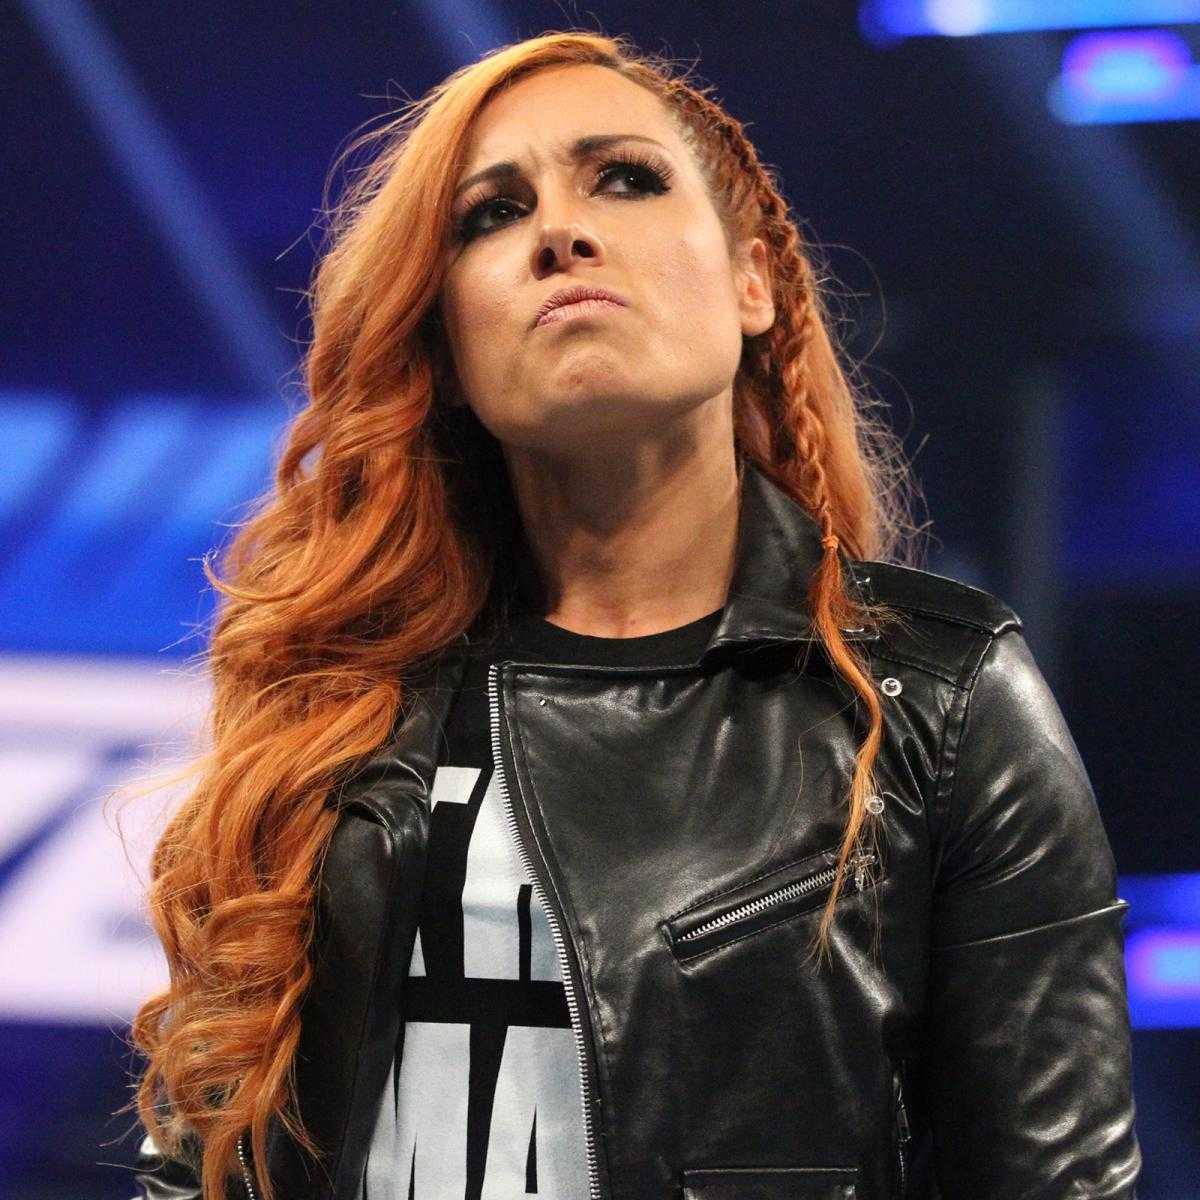 70+ Hot And Sexy Pictures of Becky Lynch – WWE Diva Will Sizzle You Up 134